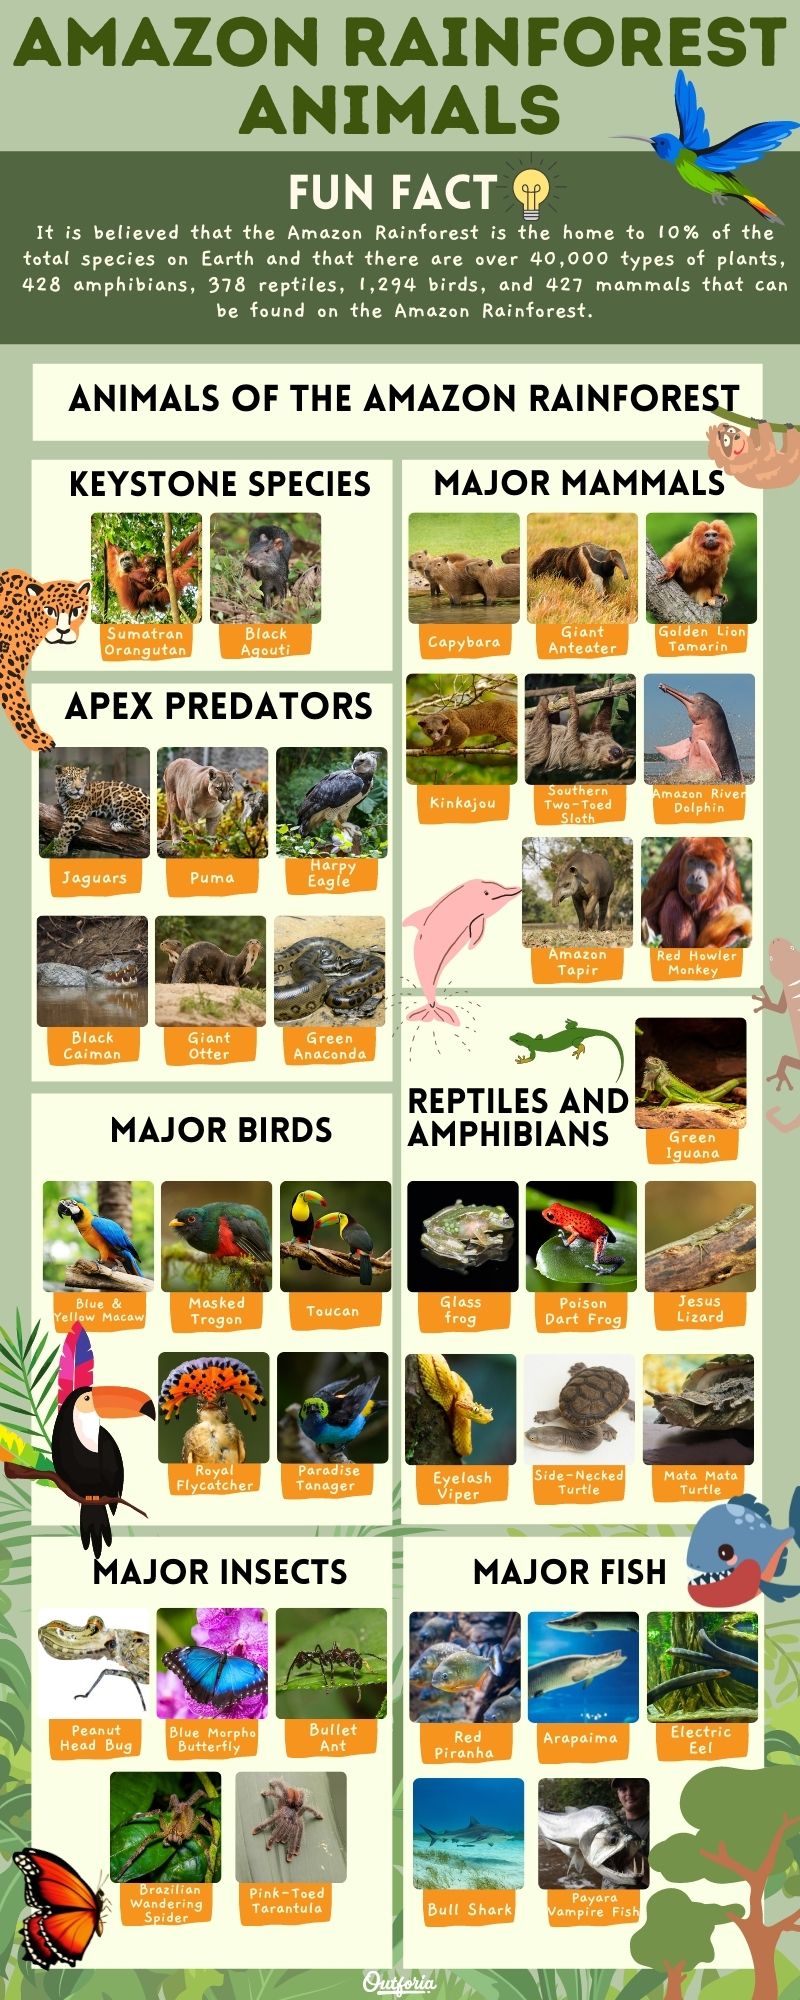 chart of the amazon rainforest animals with images and names